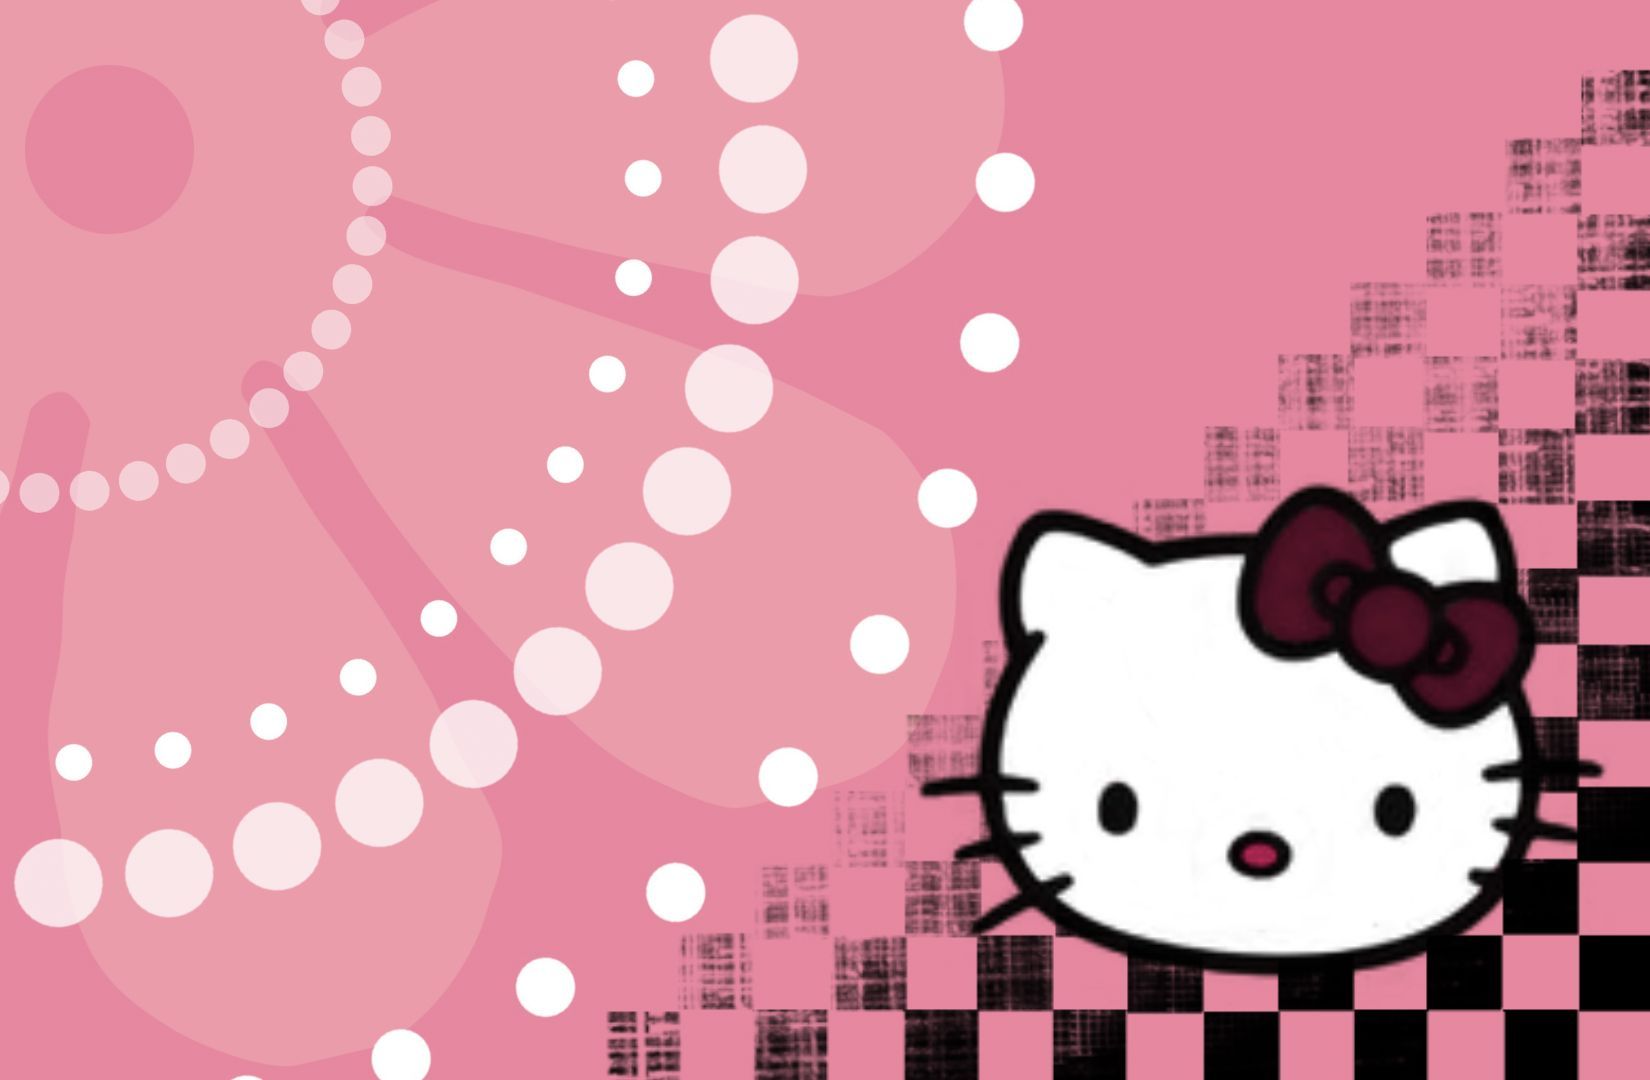 A hello kitty wallpaper with pink and black checkered background - Hello Kitty